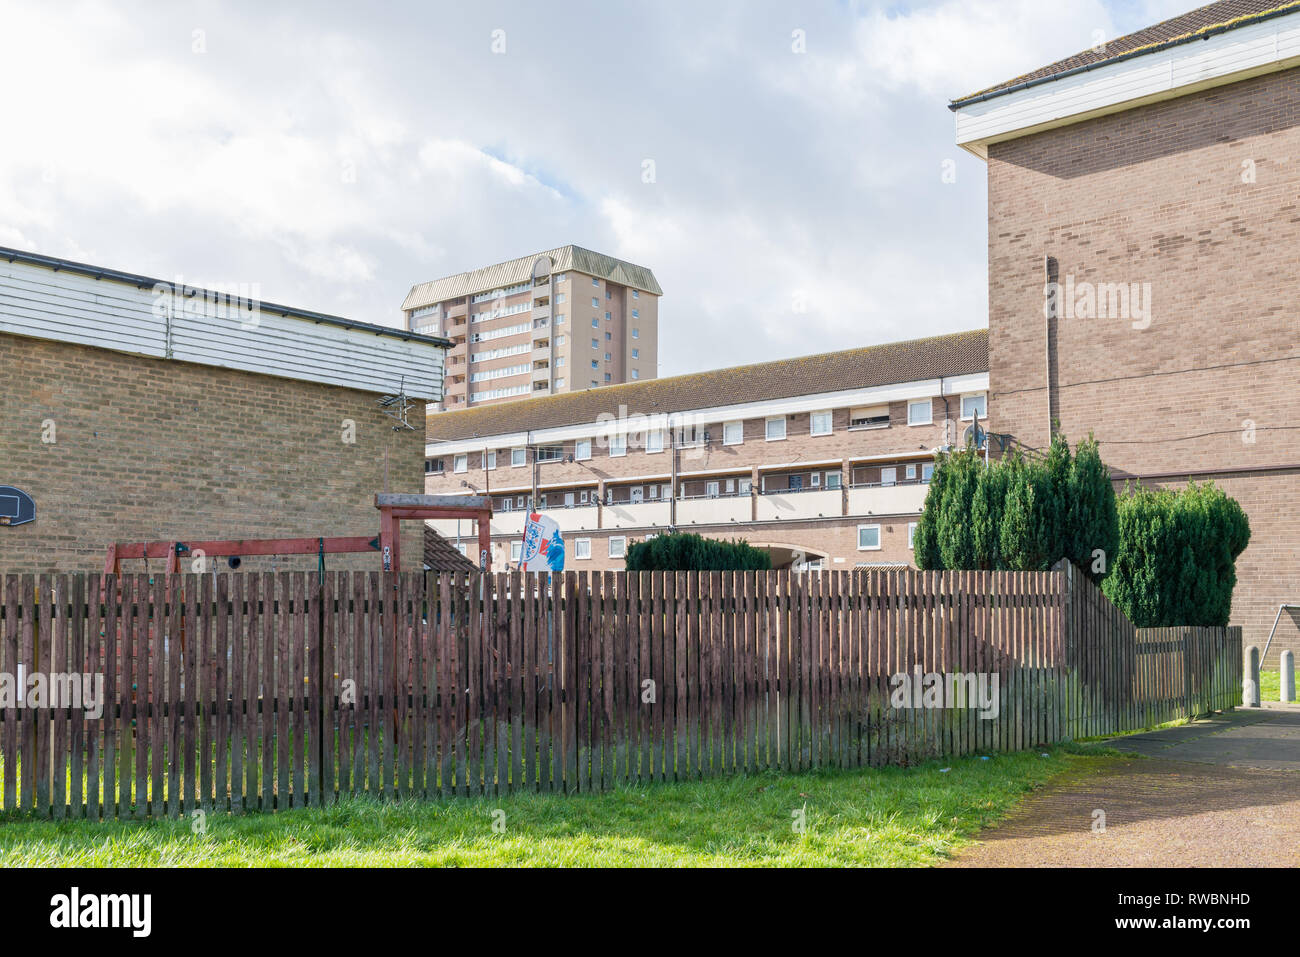 Council housing in Birmingham inner city suburb of Ladywood Stock Photo